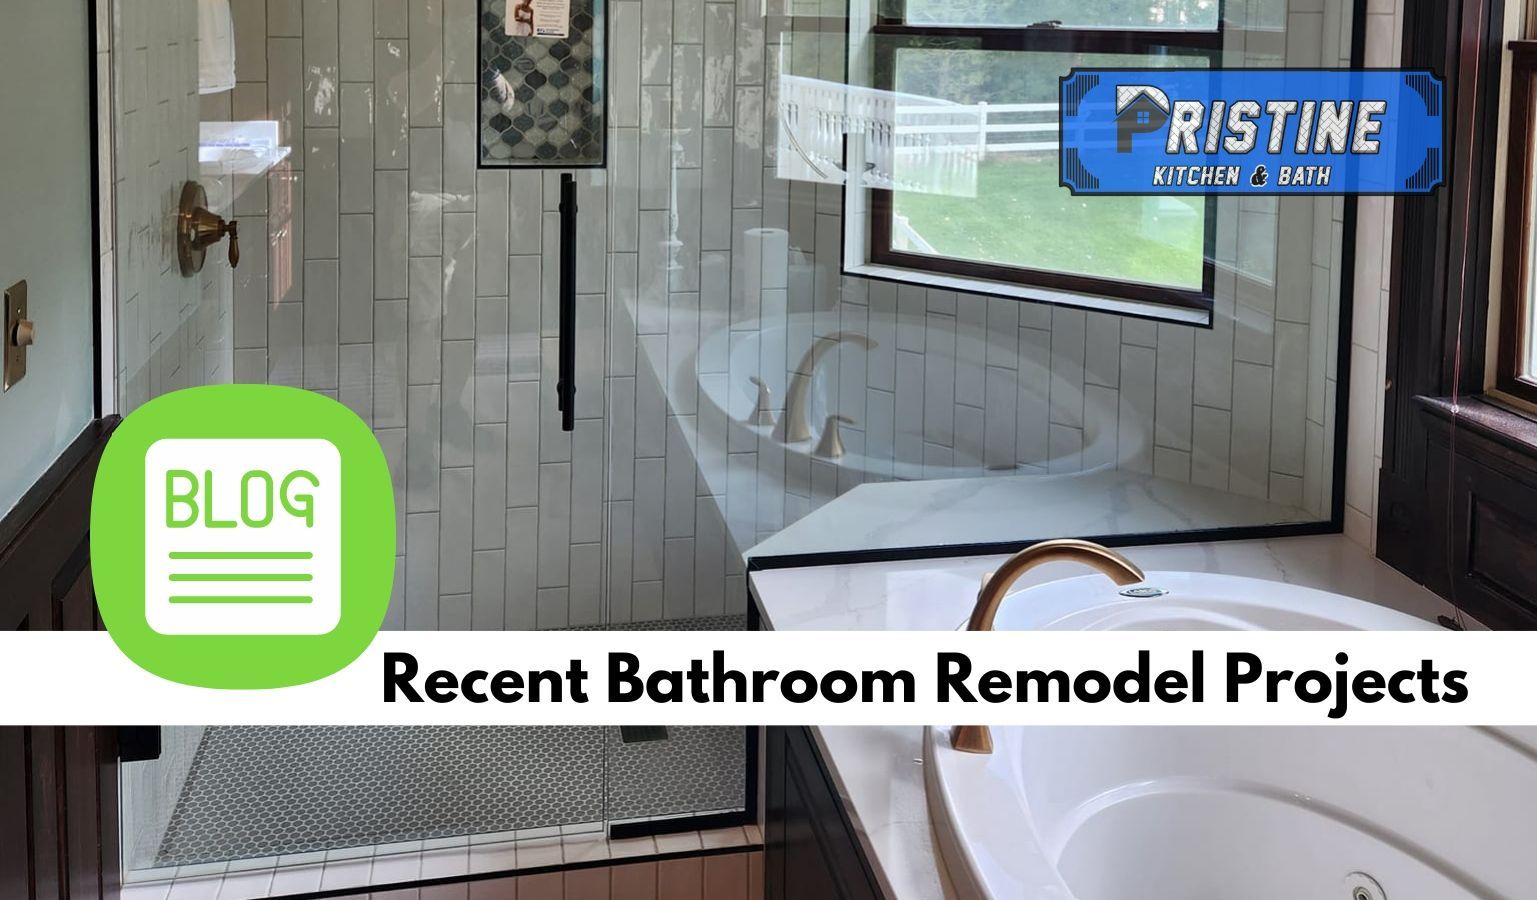 Bathroom Remodel Contractor from Nampa to Boise, ID.